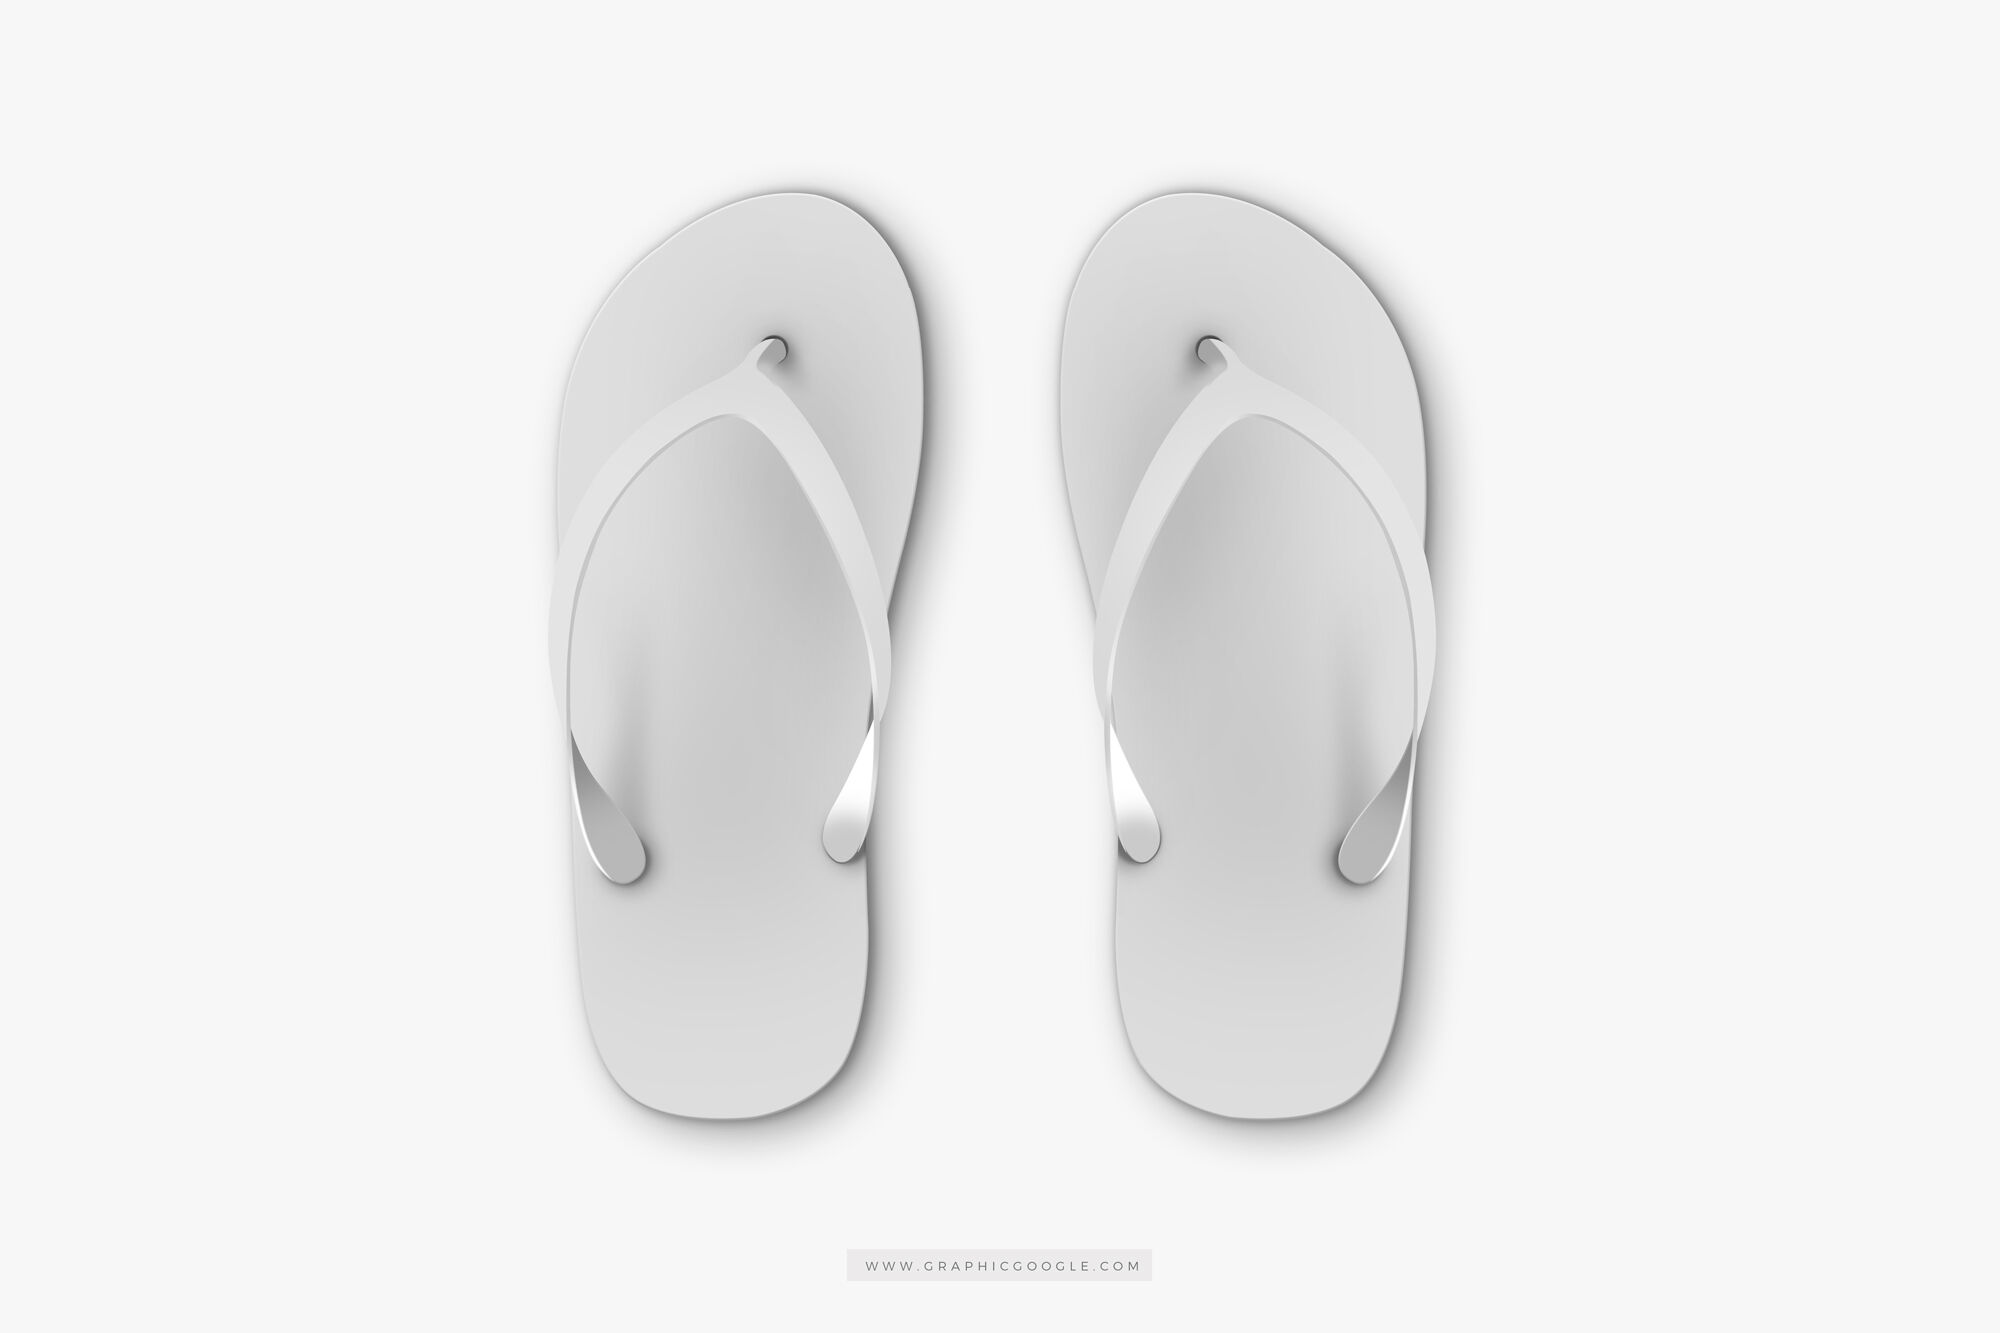 Top View Beach Slippers Mockup FREE PSD